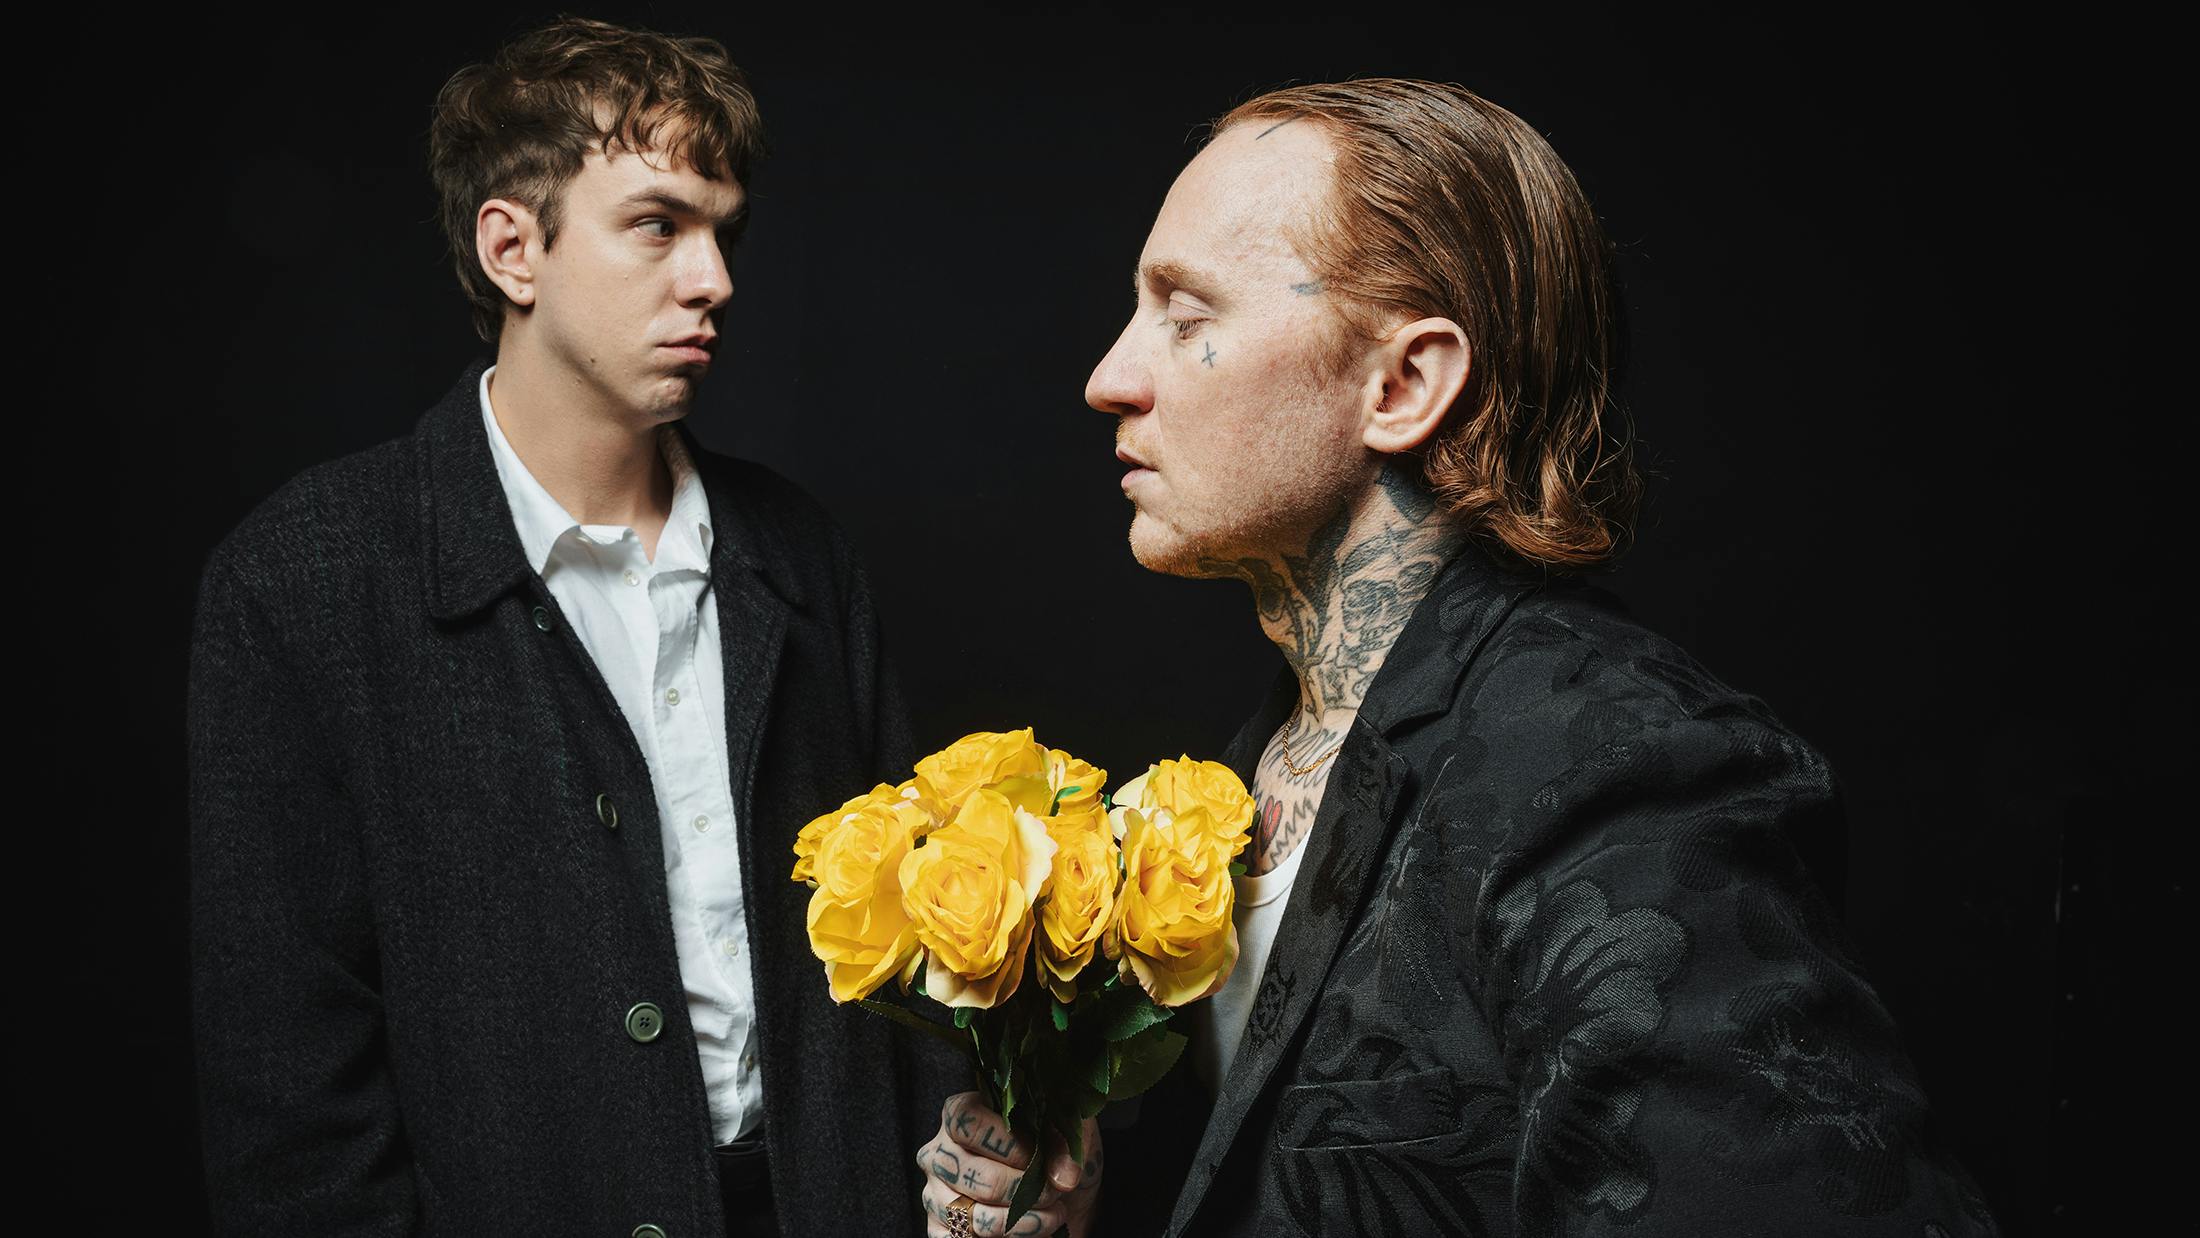 Frank Carter & The Rattlesnakes: “I’m looking forward to being the band that we’ve always wanted to be”